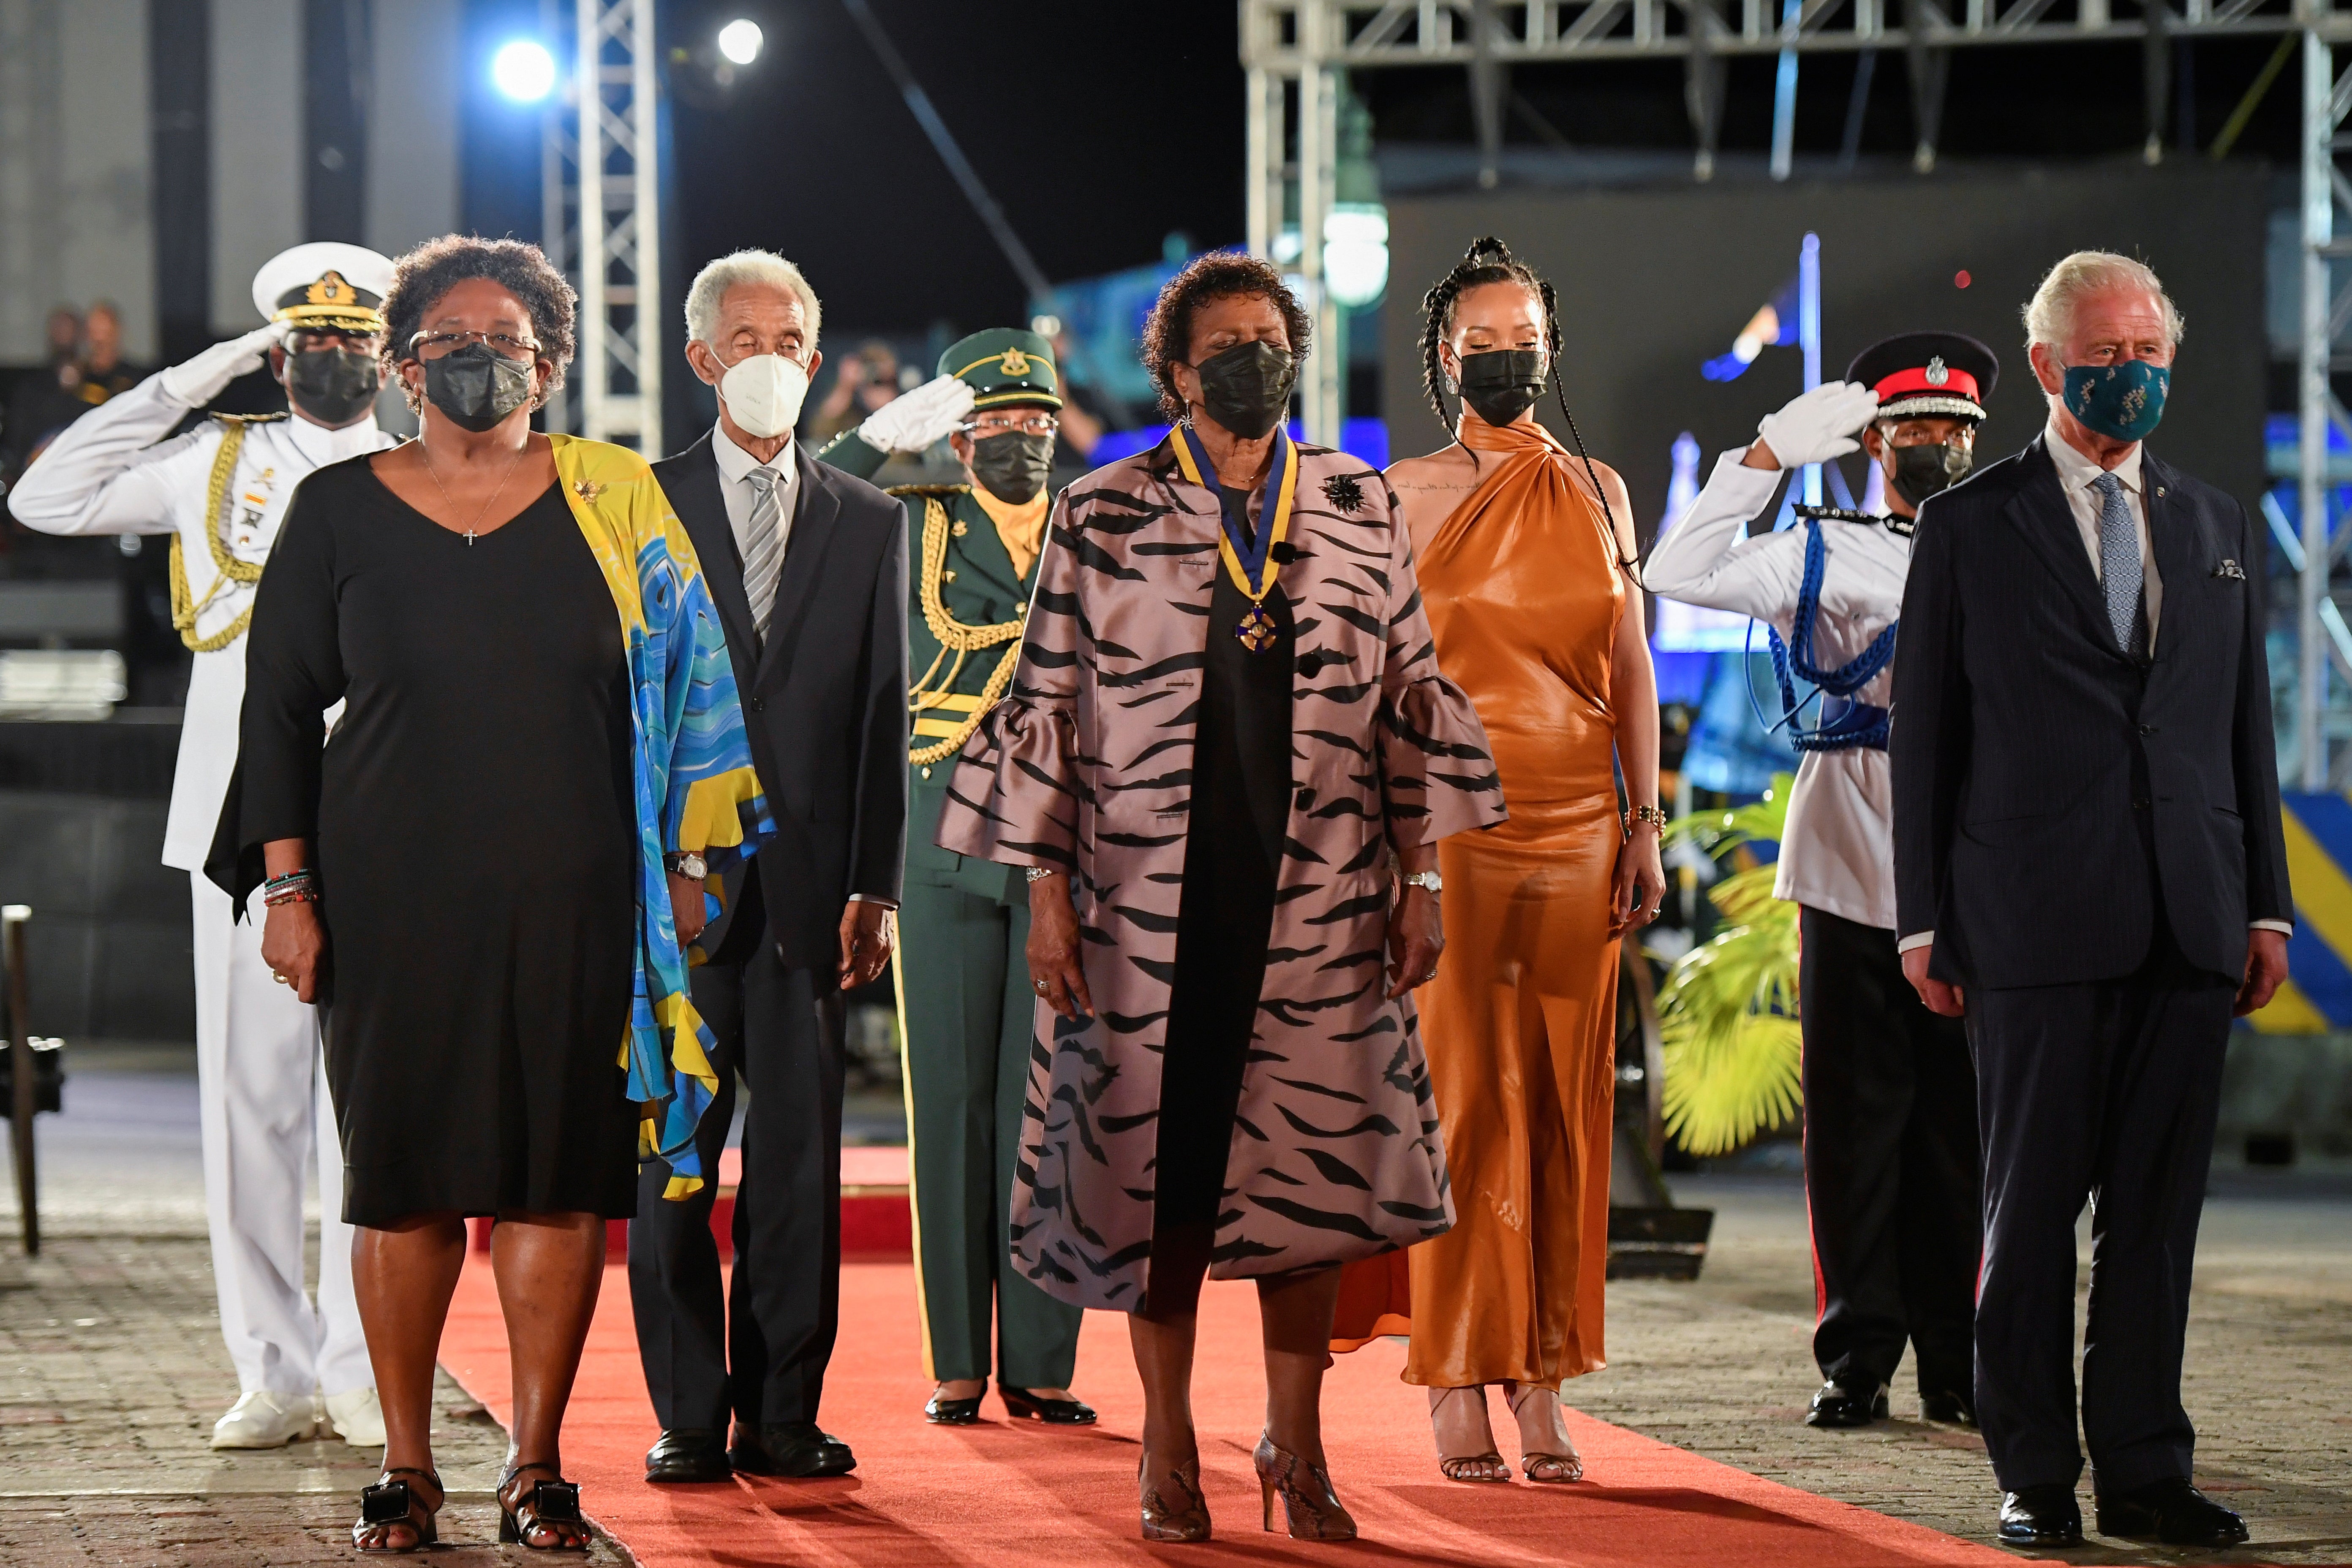 Mottley at the 2021 handover event alongside guests including Rihanna and then Prince Charles, officially parting ways with the British monarchy’s reign over Barbados